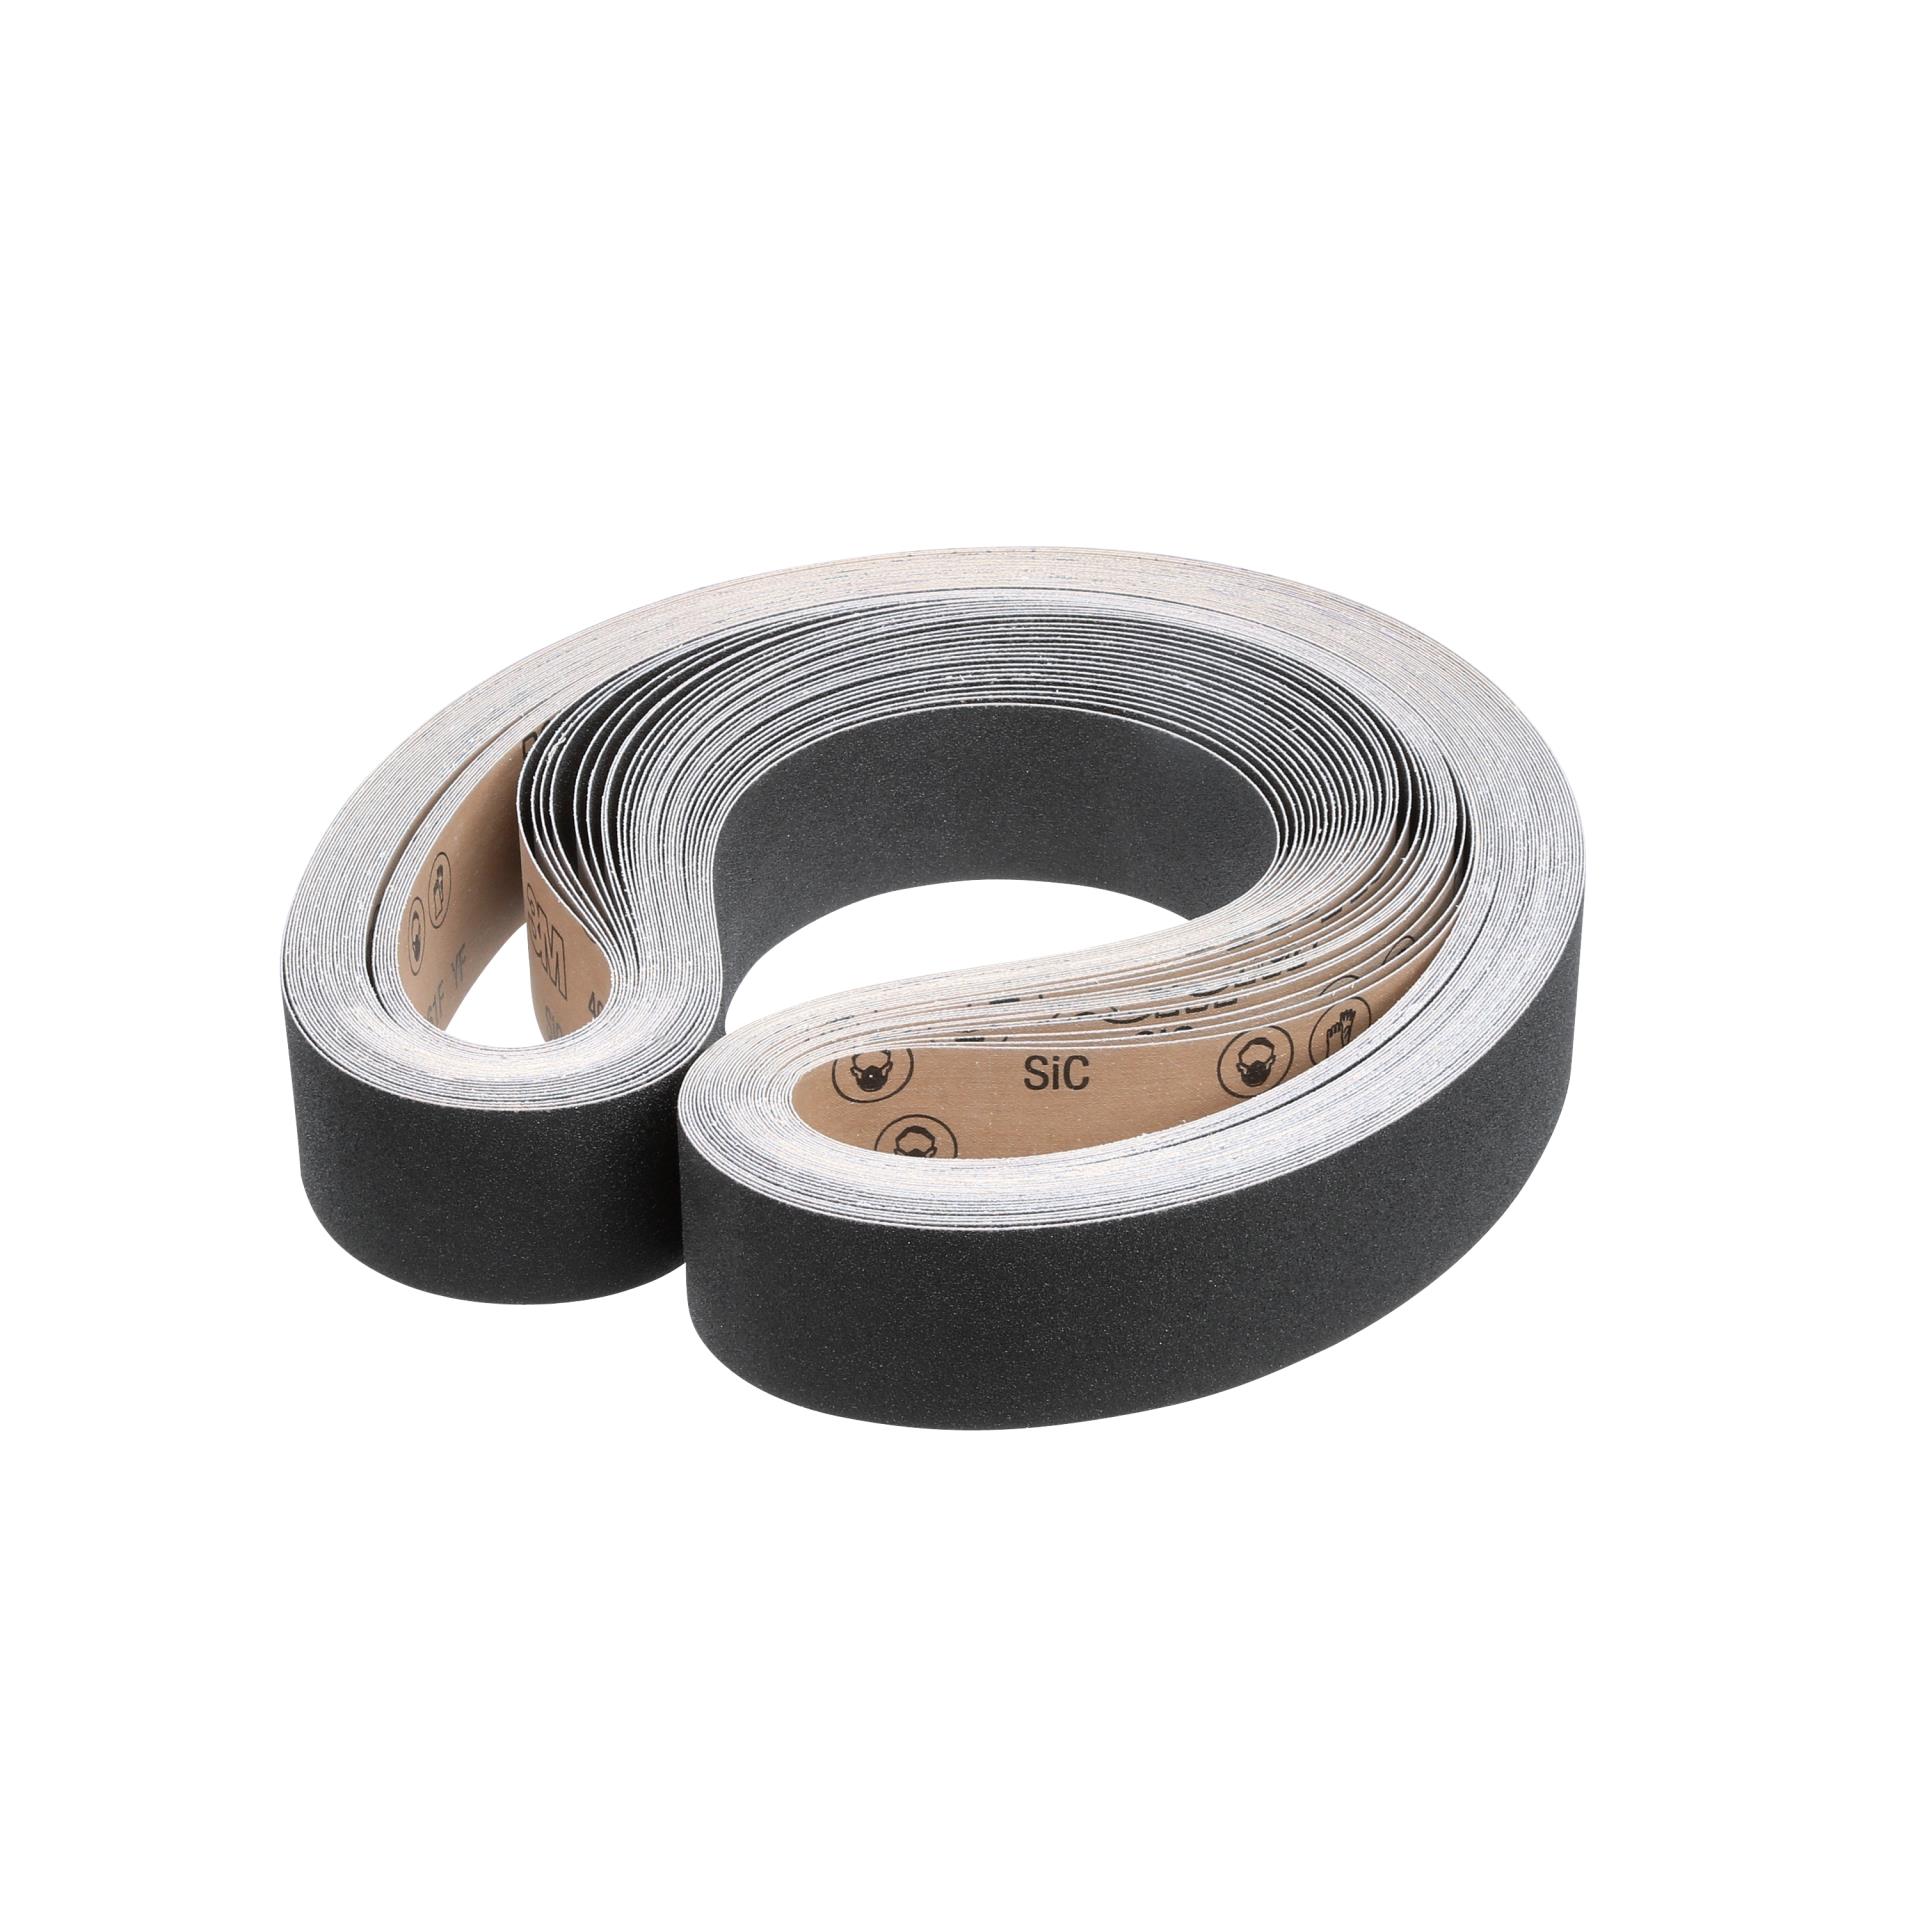 Standard Abrasives Surface Conditioning RC Belt 888009 1 in x 42 in VFN 10 per case 3M 